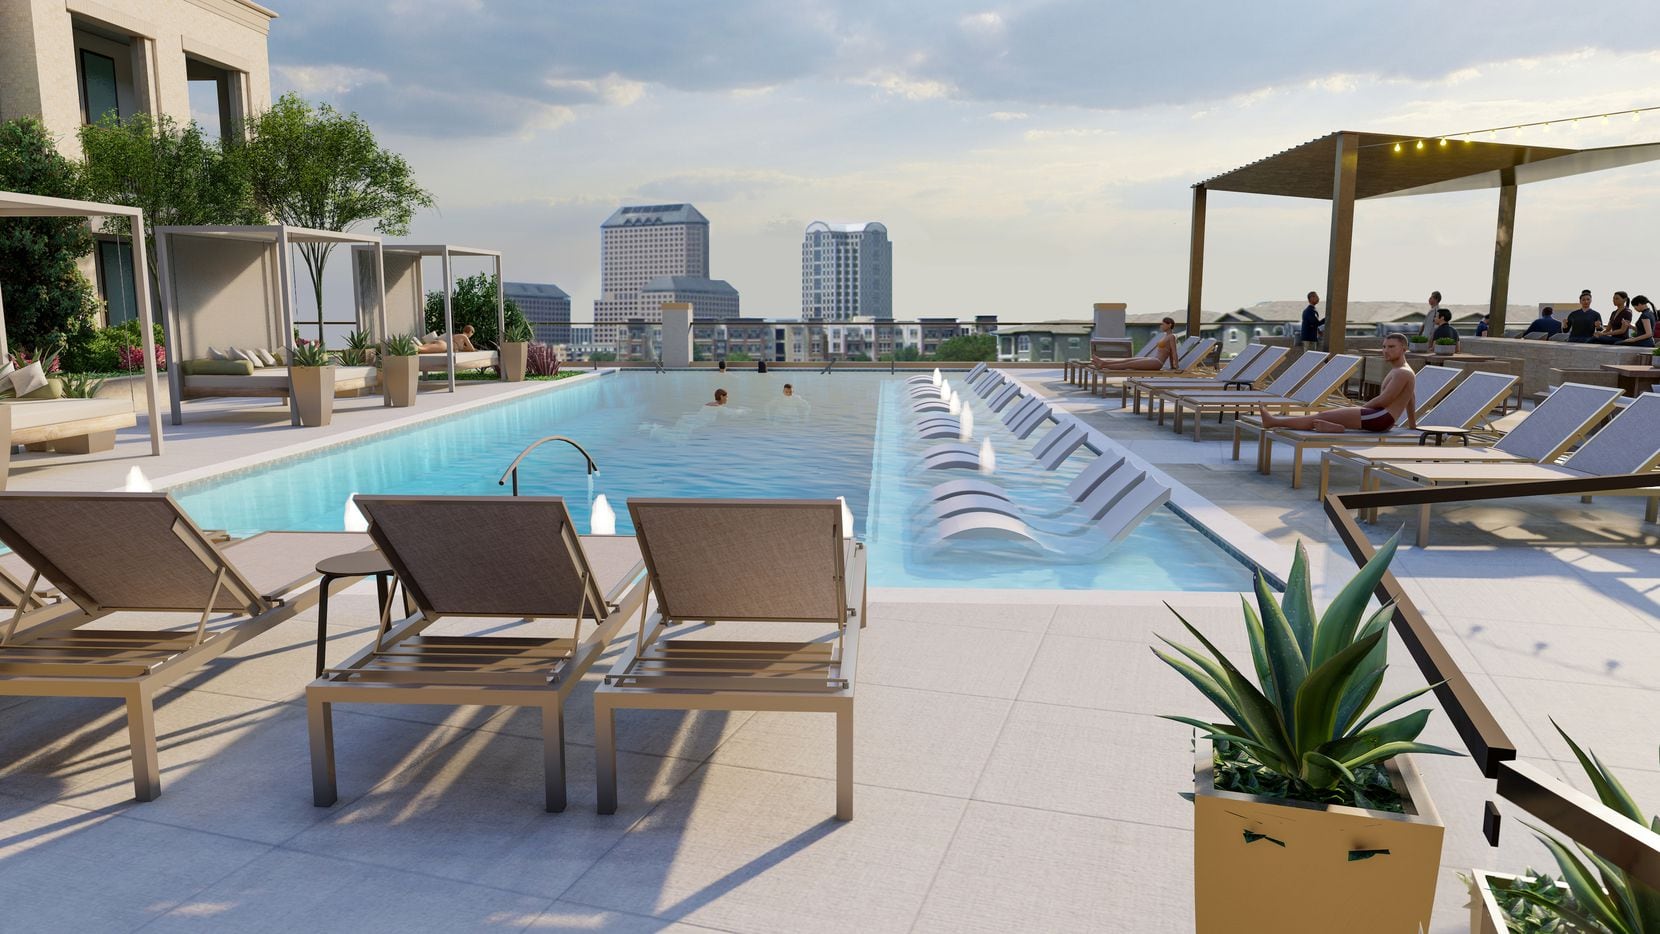 The Mustang Apartments will have a pool deck with views over the lake in Las Colinas.